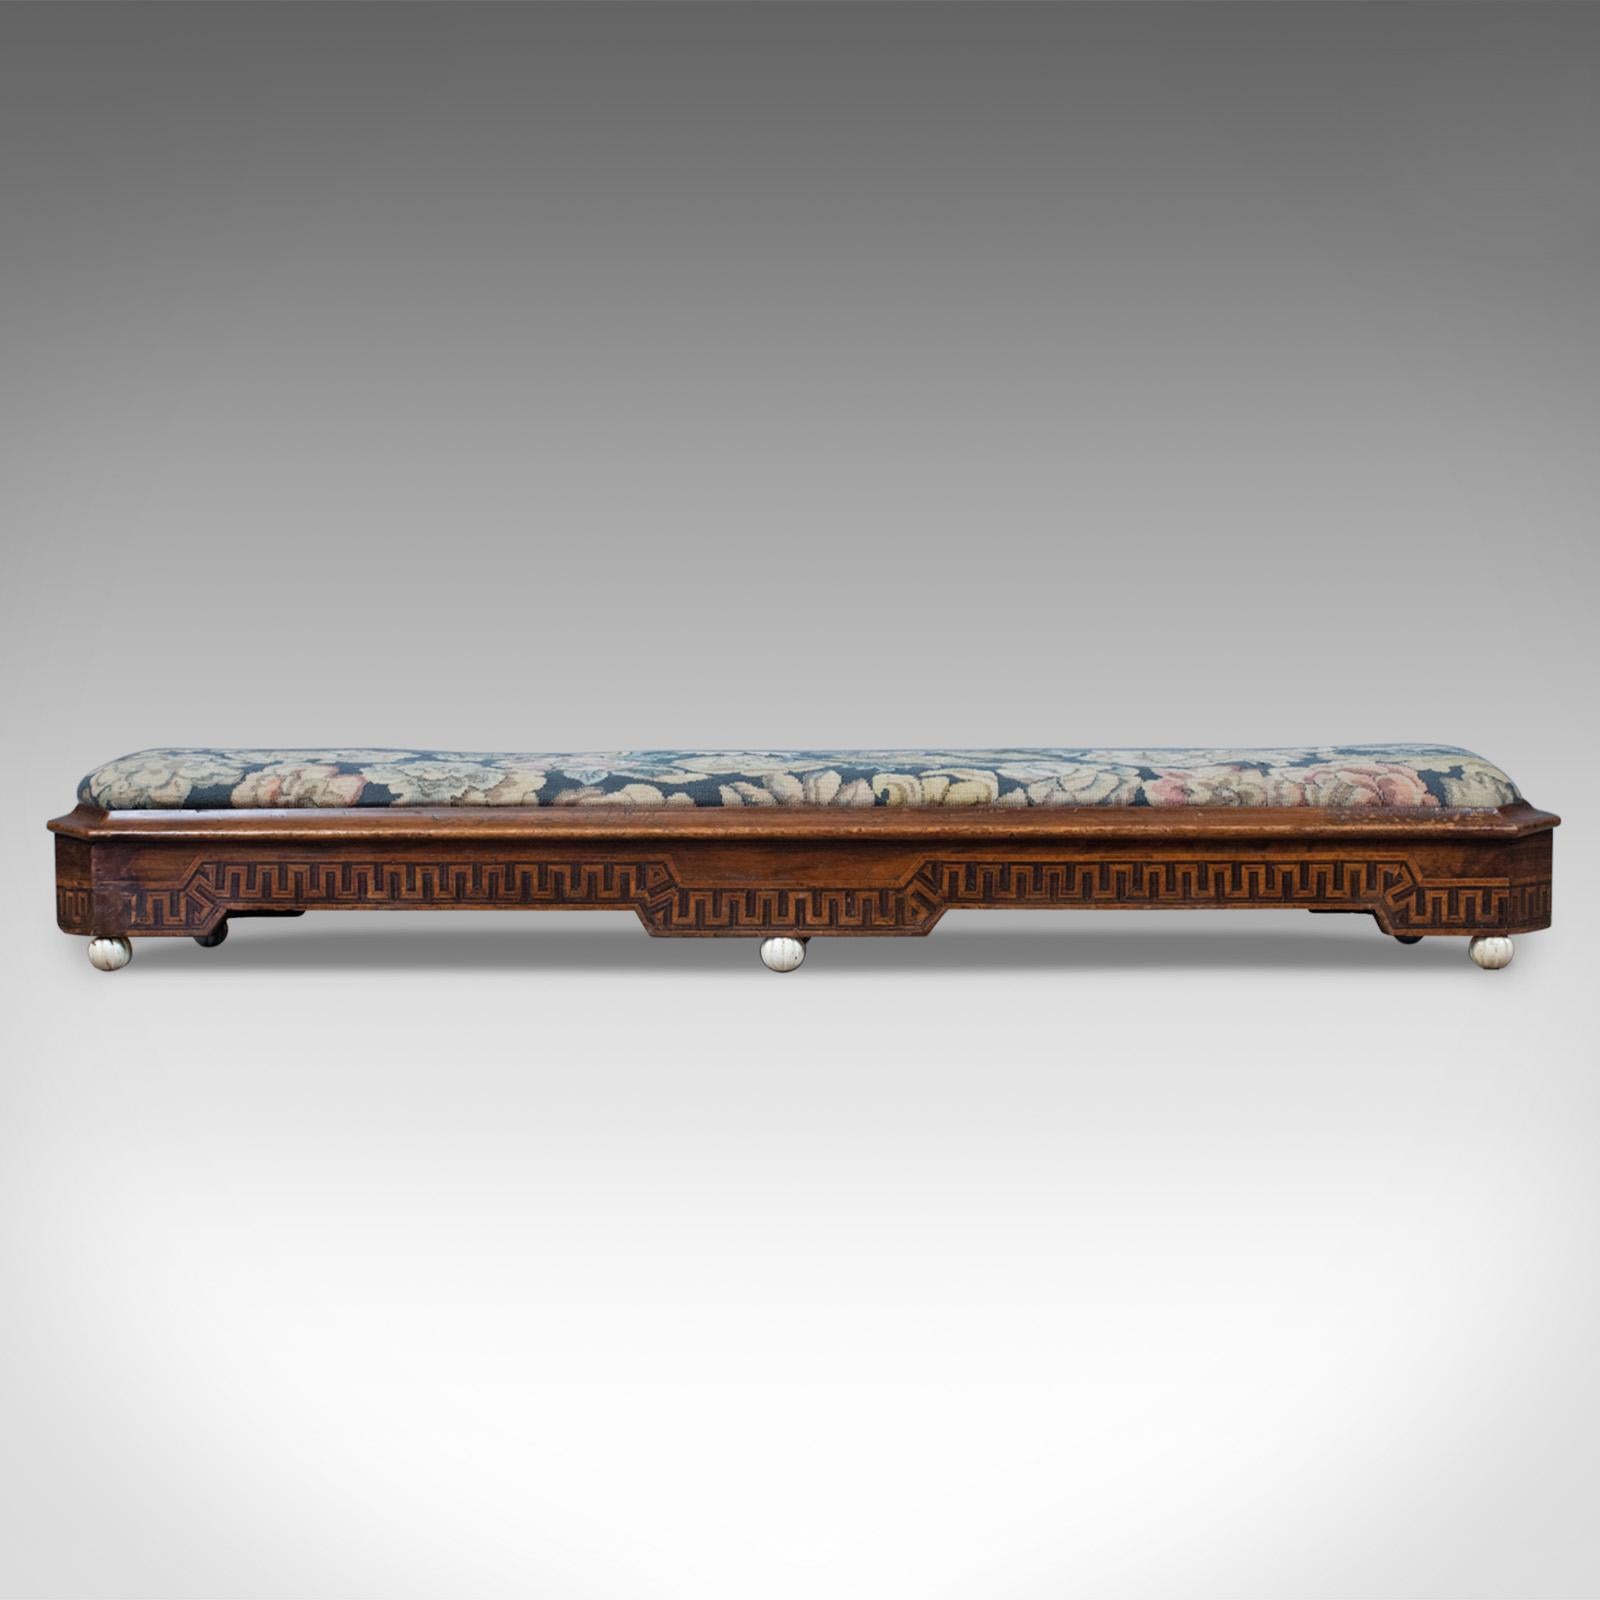 This is an antique carriage stool, a long, Victorian footrest in walnut with needlepoint tapestry upholstery and dating to the mid 19th century, circa 1860.

Solid walnut, displays well with a wax polished finish
In biscuit hues, grain interest